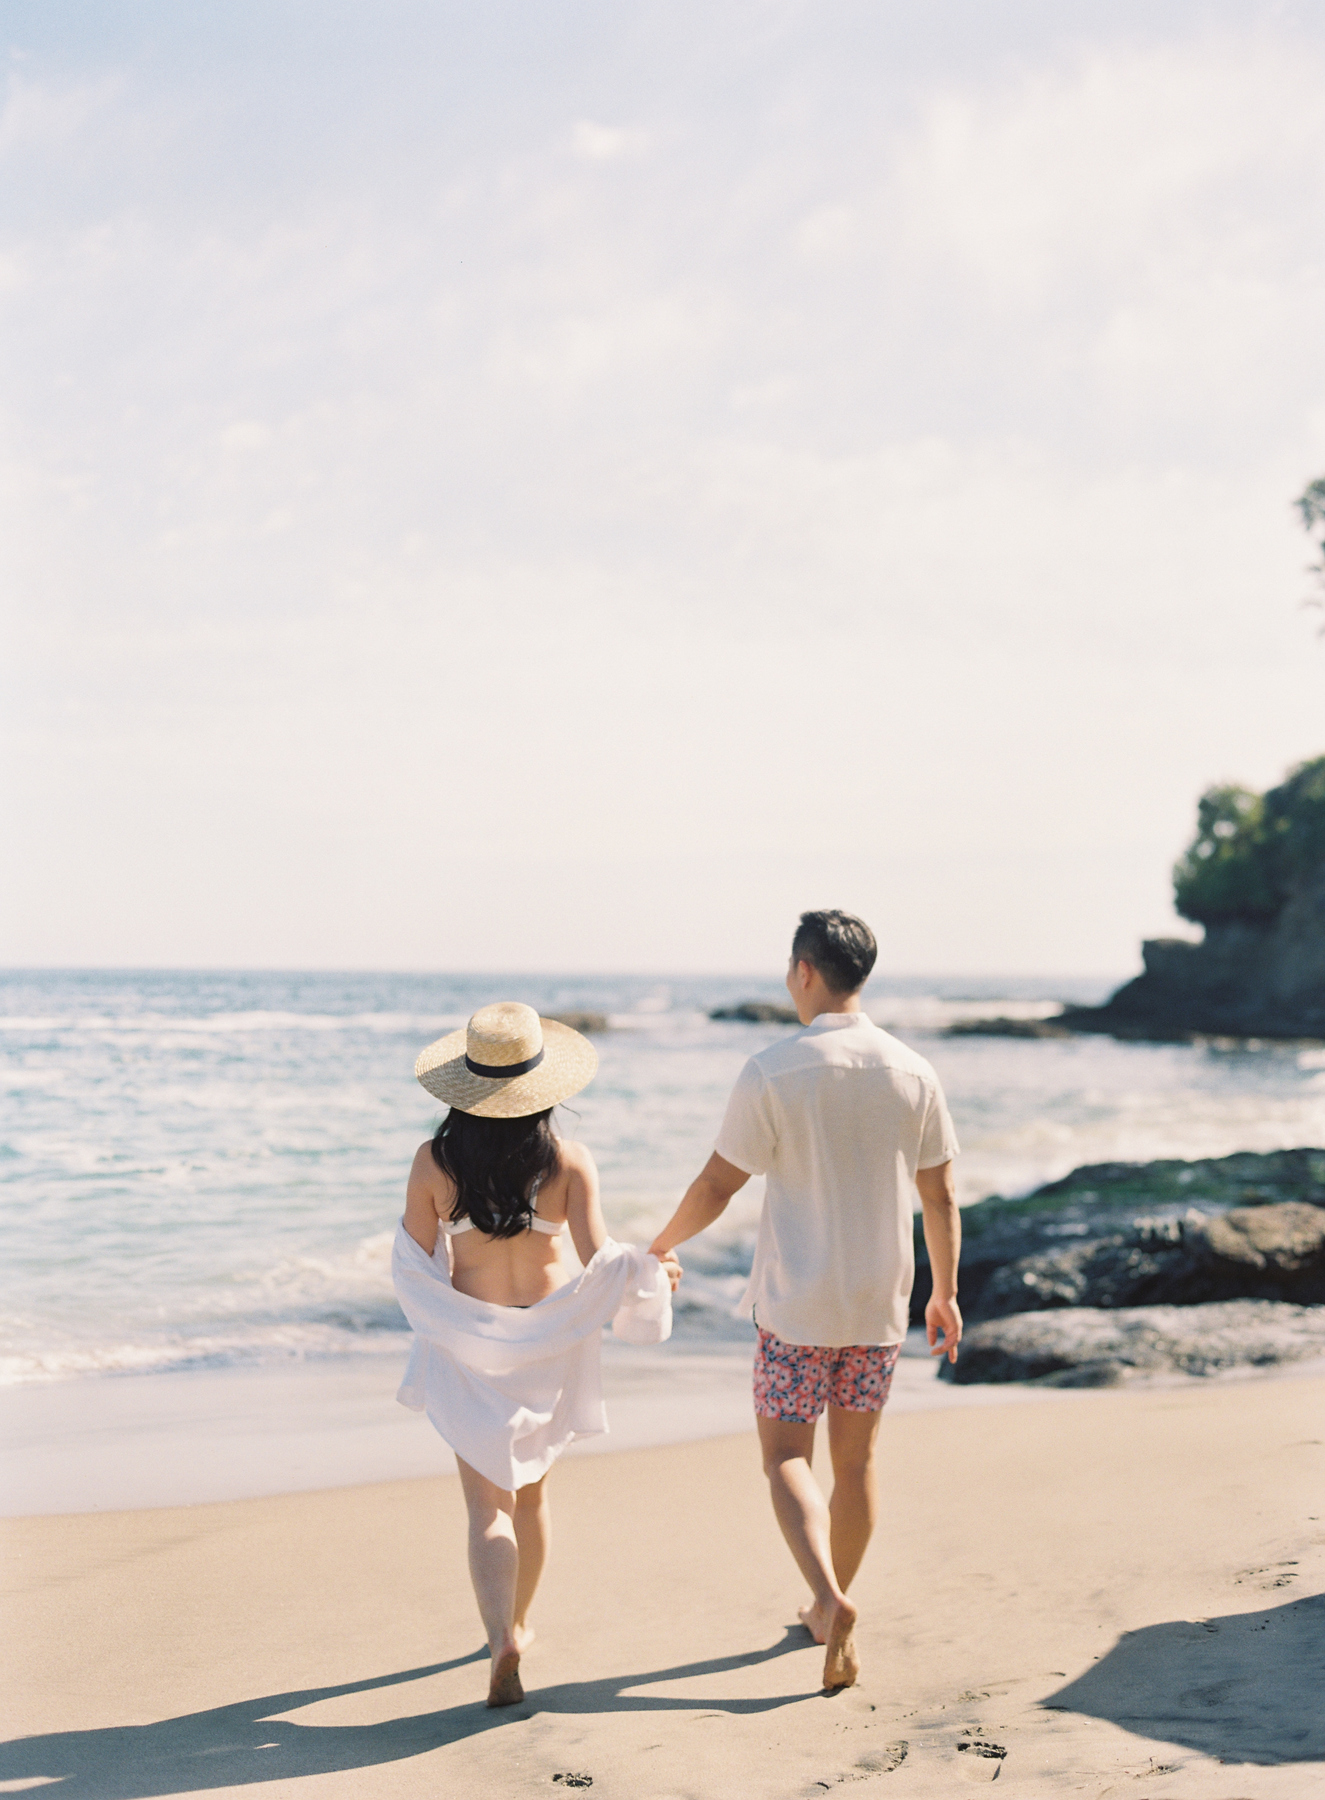 Valentine’s Day Gift Ideas - Couple in the beach